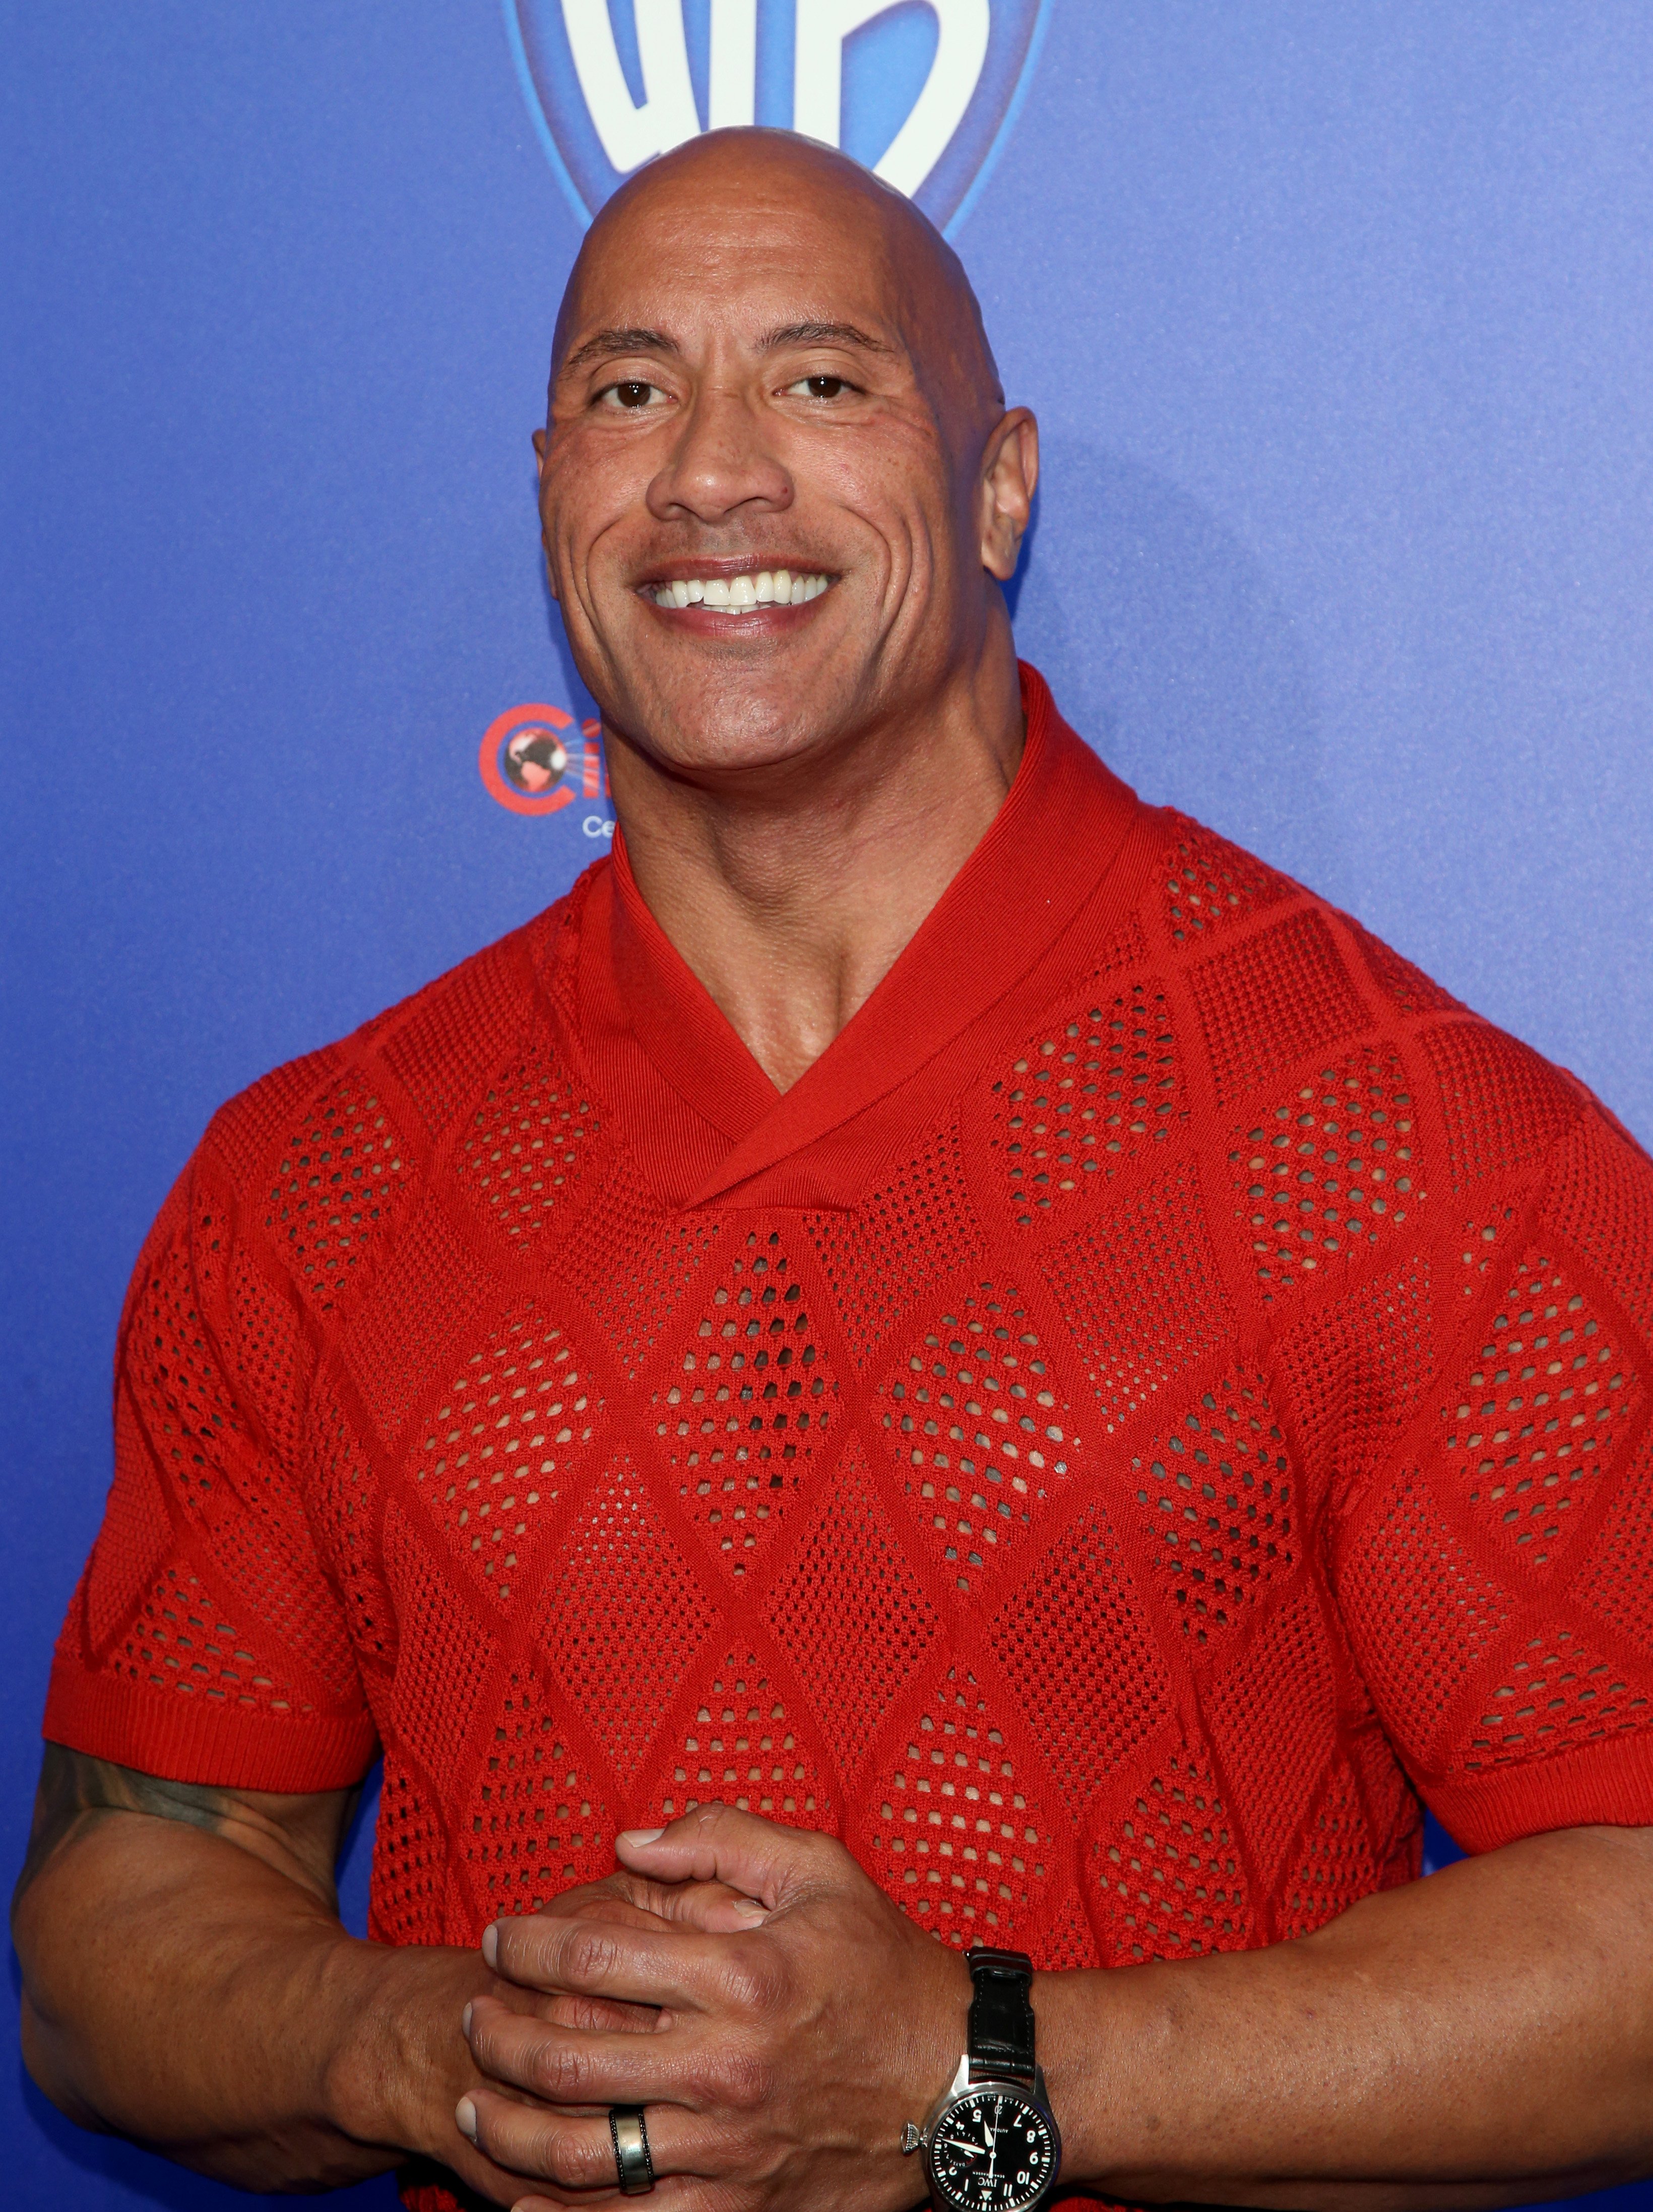 Actor Dwayne "The Rock" Johnson attends Warner Bros. Pictures "The Big Picture" presentation at Caesars Palace during CinemaCon 2022, on April 26, 2022 in Las Vegas, Nevada. | Source: Getty Images